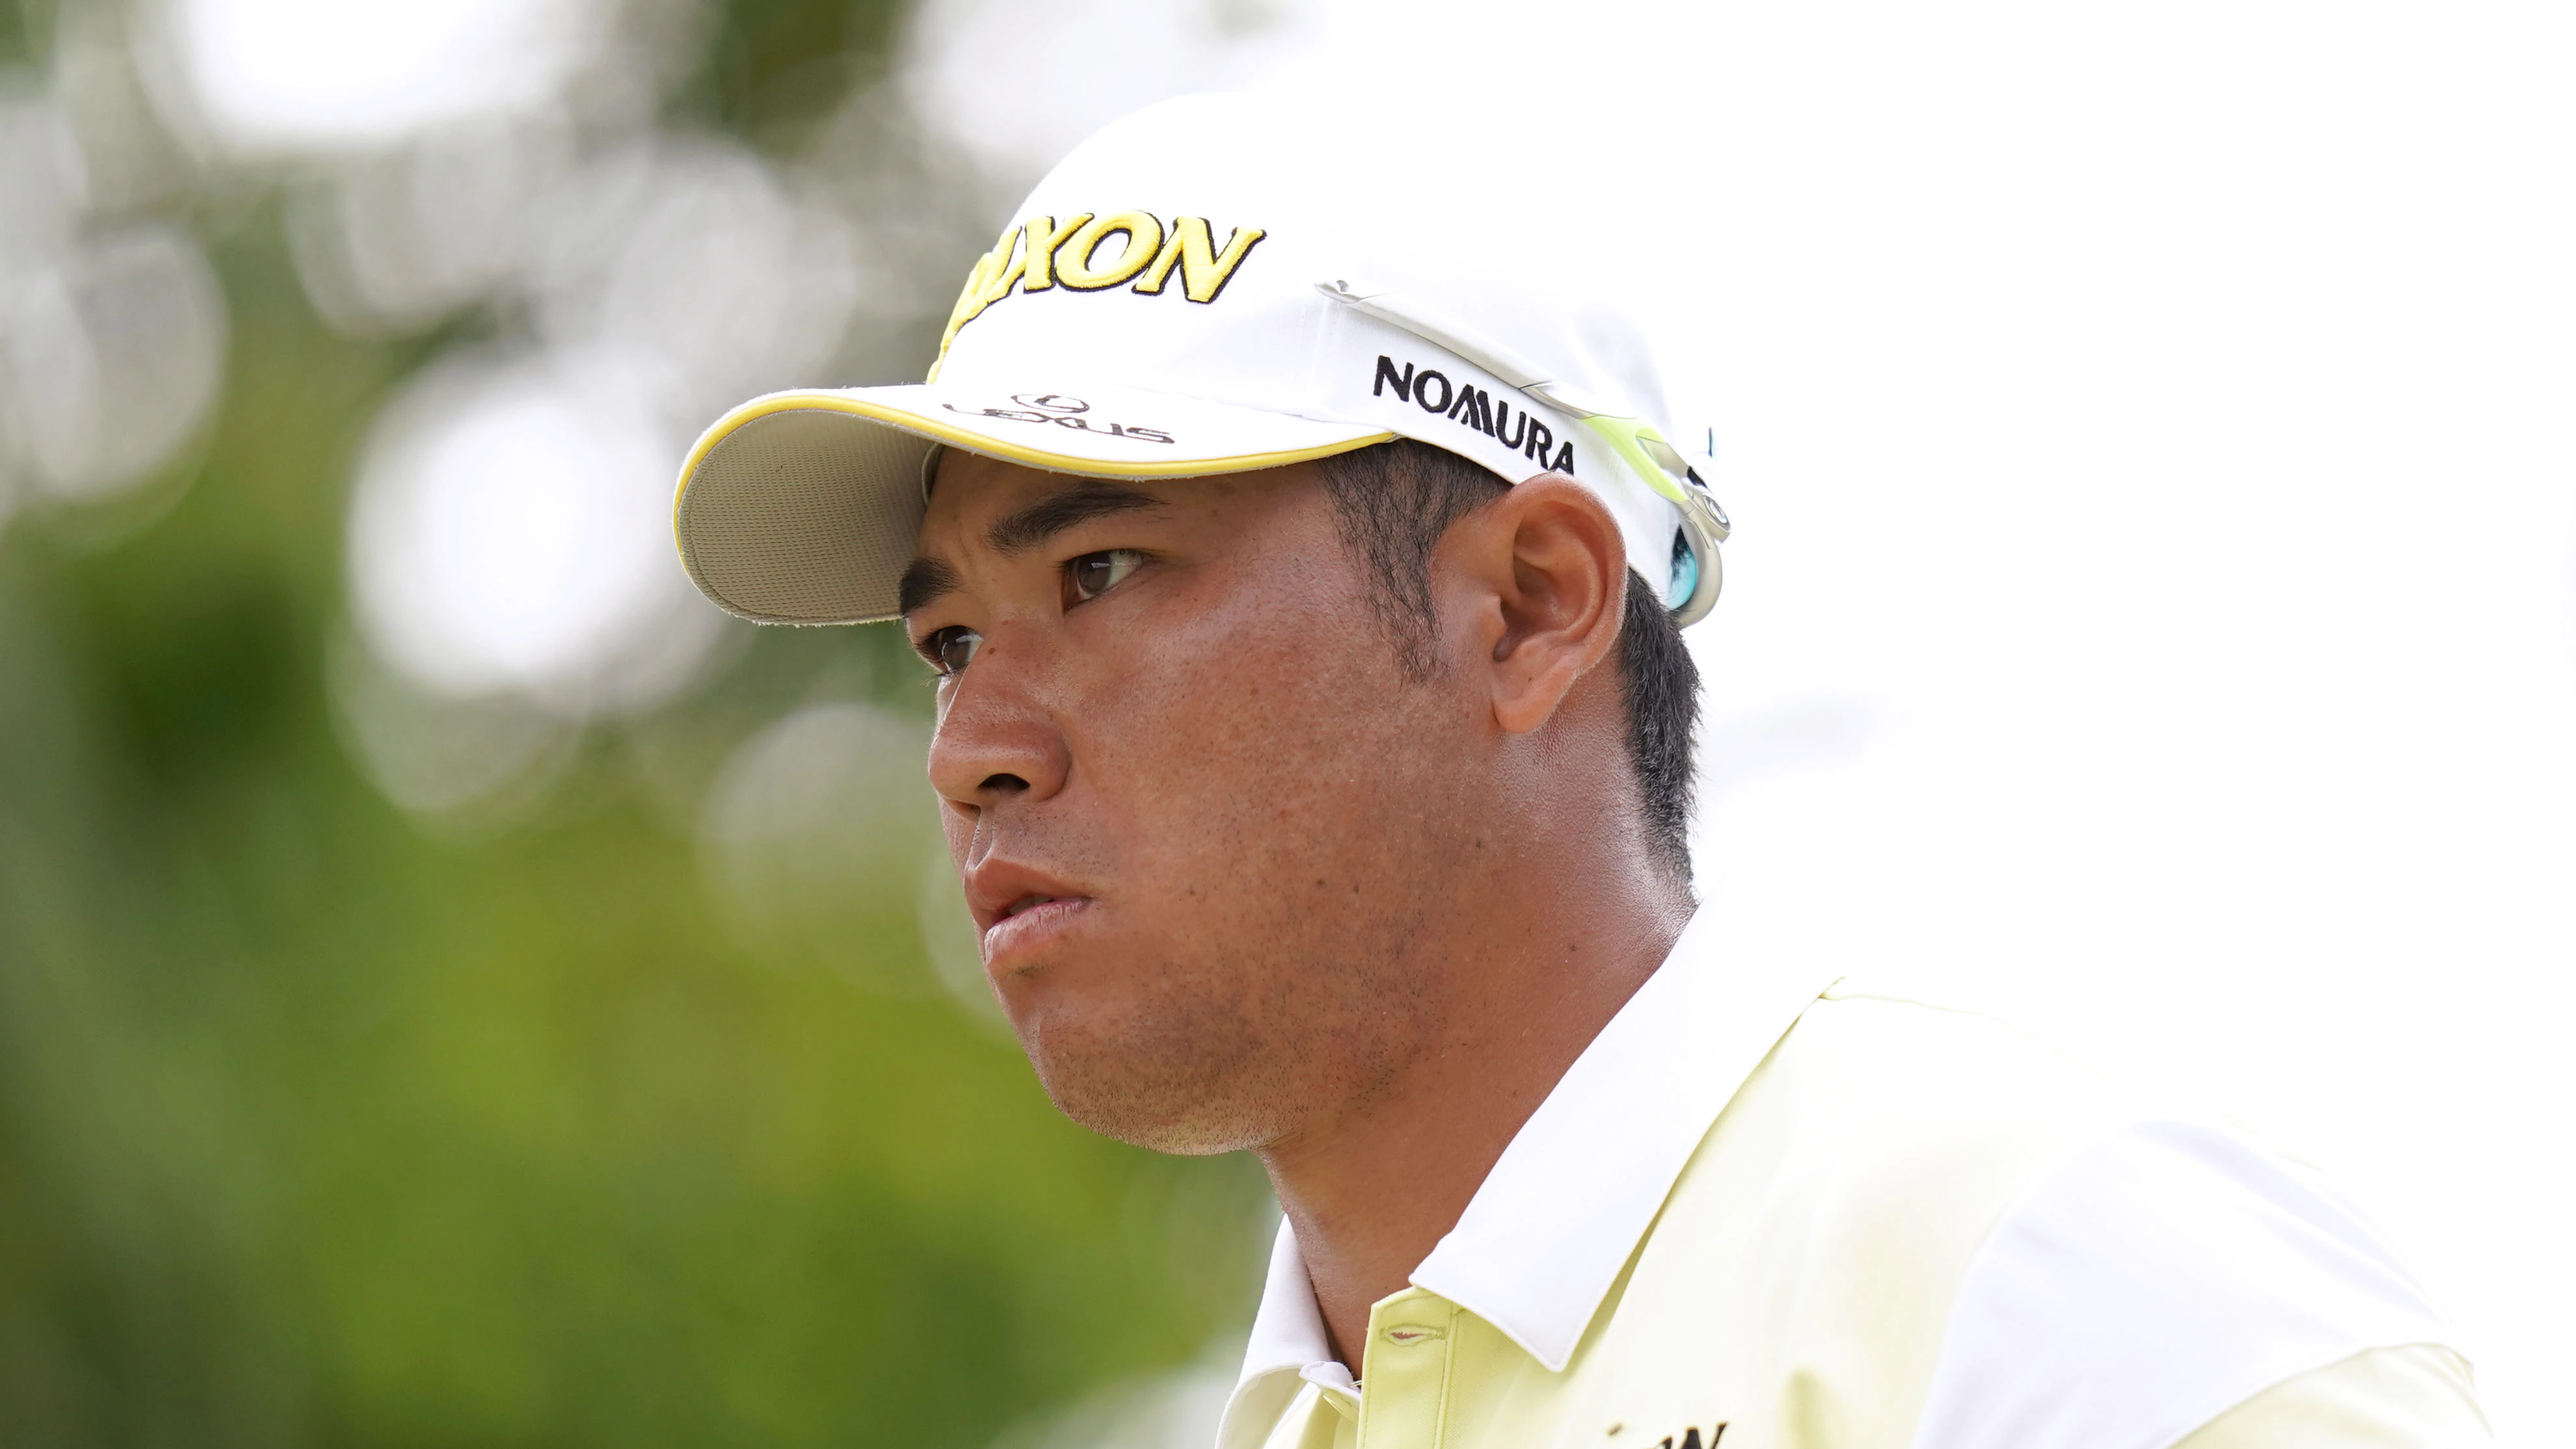 Despite last year's WD, Matsuyama has 'only good memories' at WMPO